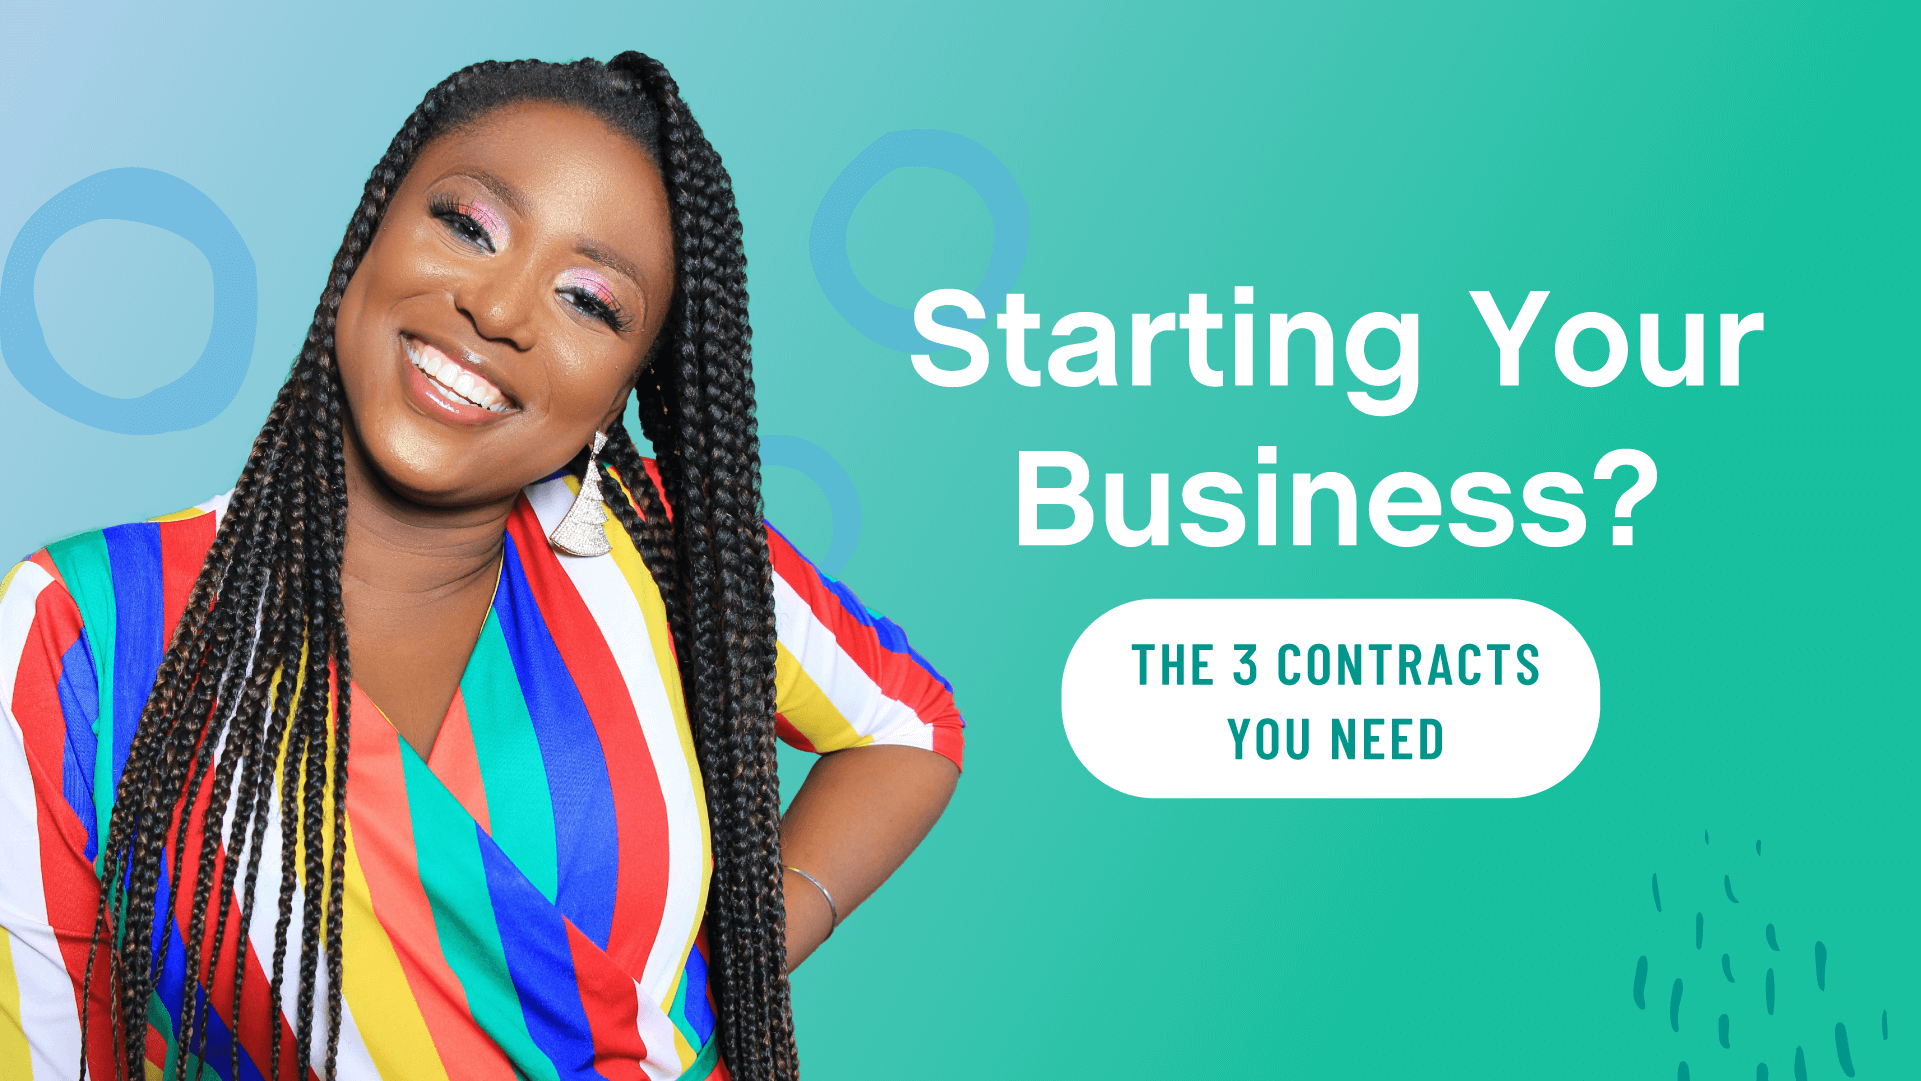 3 Contracts Everyone Needs to Start Their Own Business